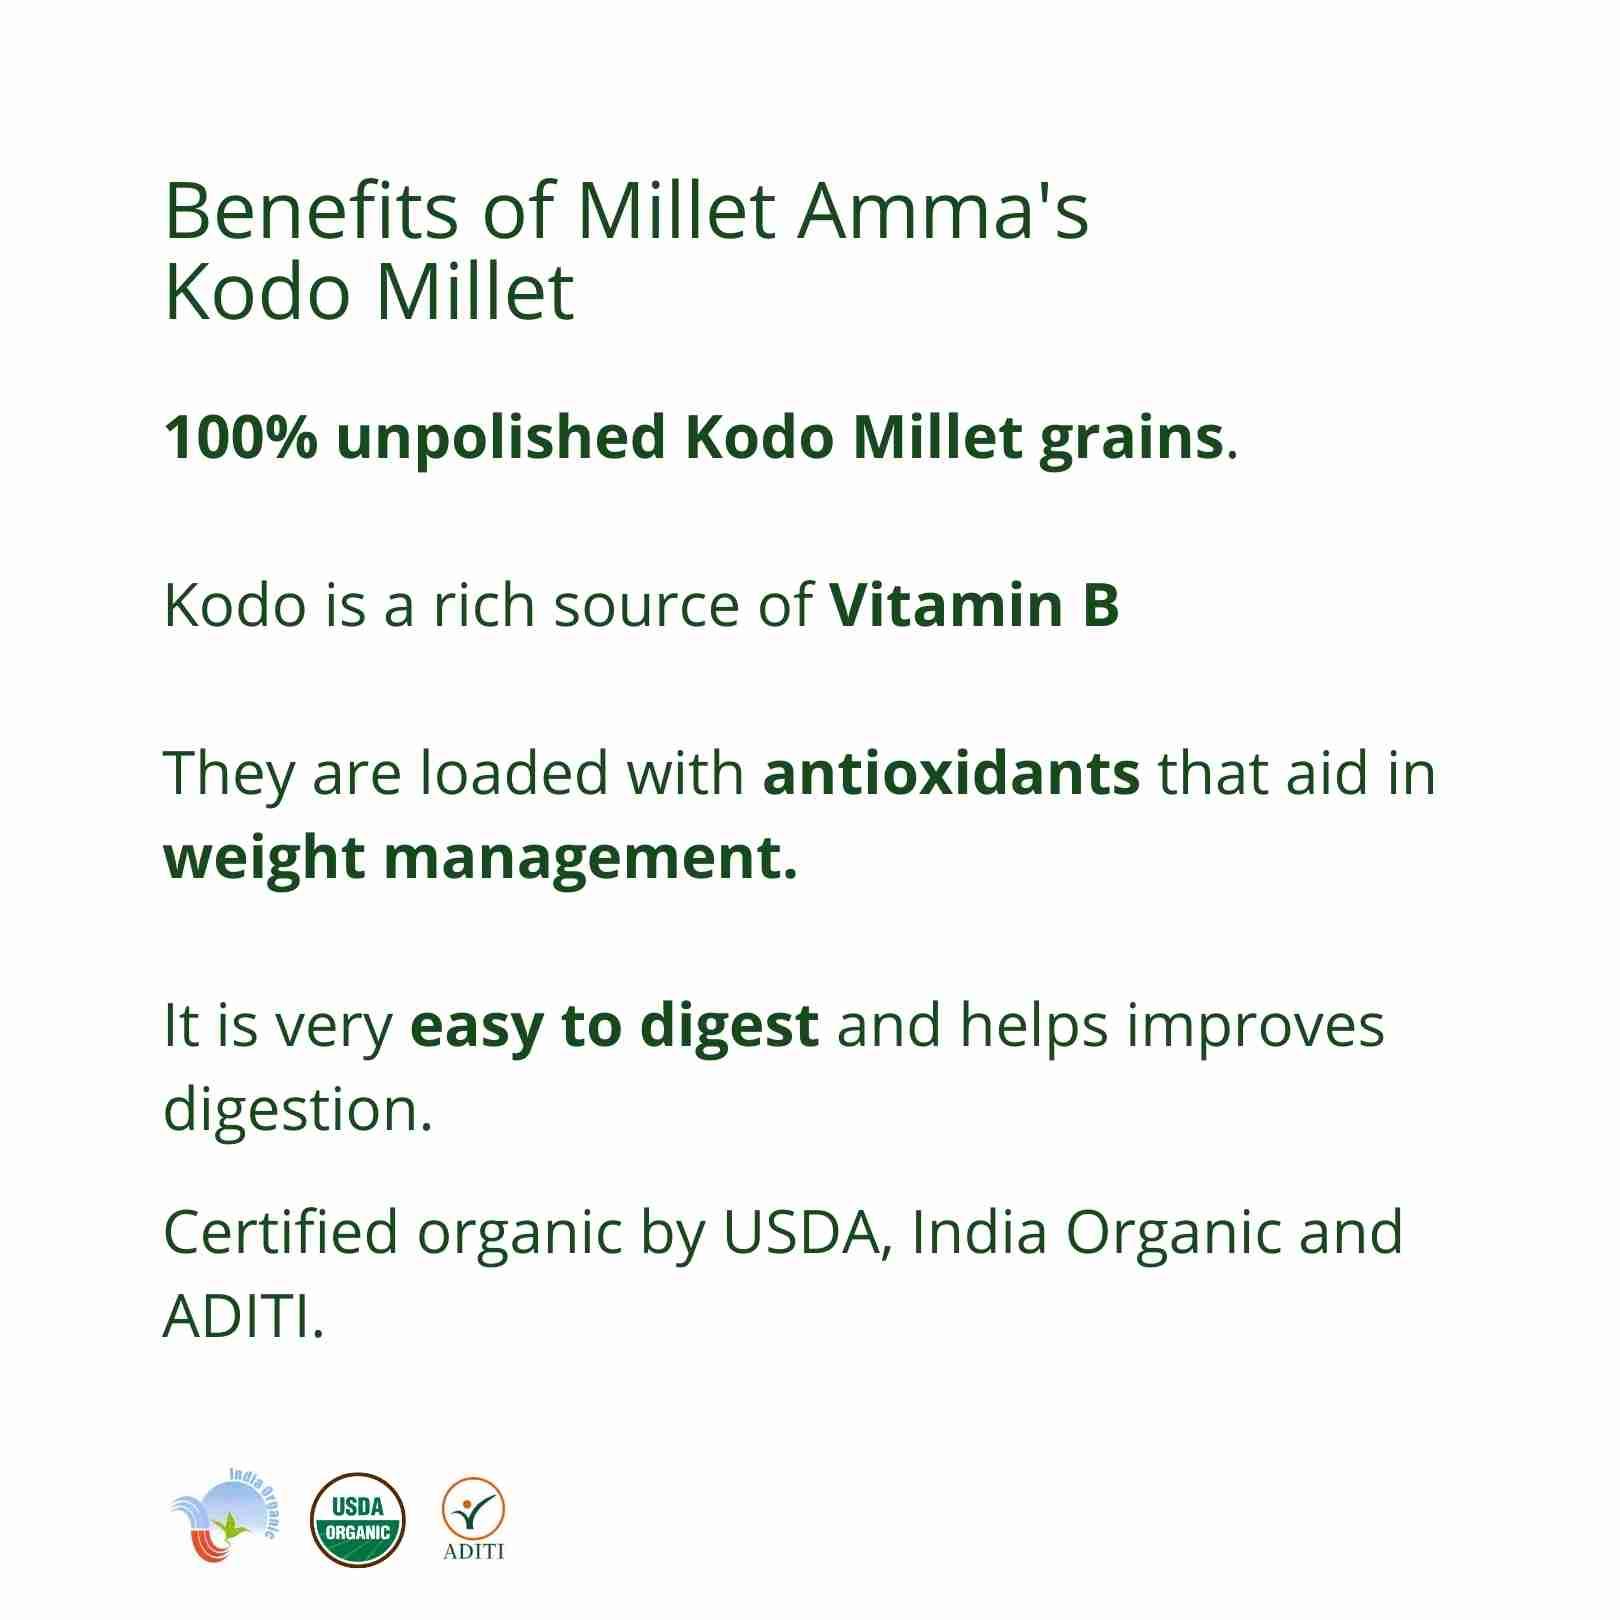 Millet Amma’s Organic Kodo Millet- Millet Amma’s Organic Kodo Millets are a rich source of Vitamin B.  These unpolished Kodo Millets are loaded with antioxidants that aid in weight management and in regulating your glucose and cholesterol levels.  You can make a variety of gluten free dishes with Kodo Millet like pulao, pongal, khichdi, salads, stir-fry and so much more.